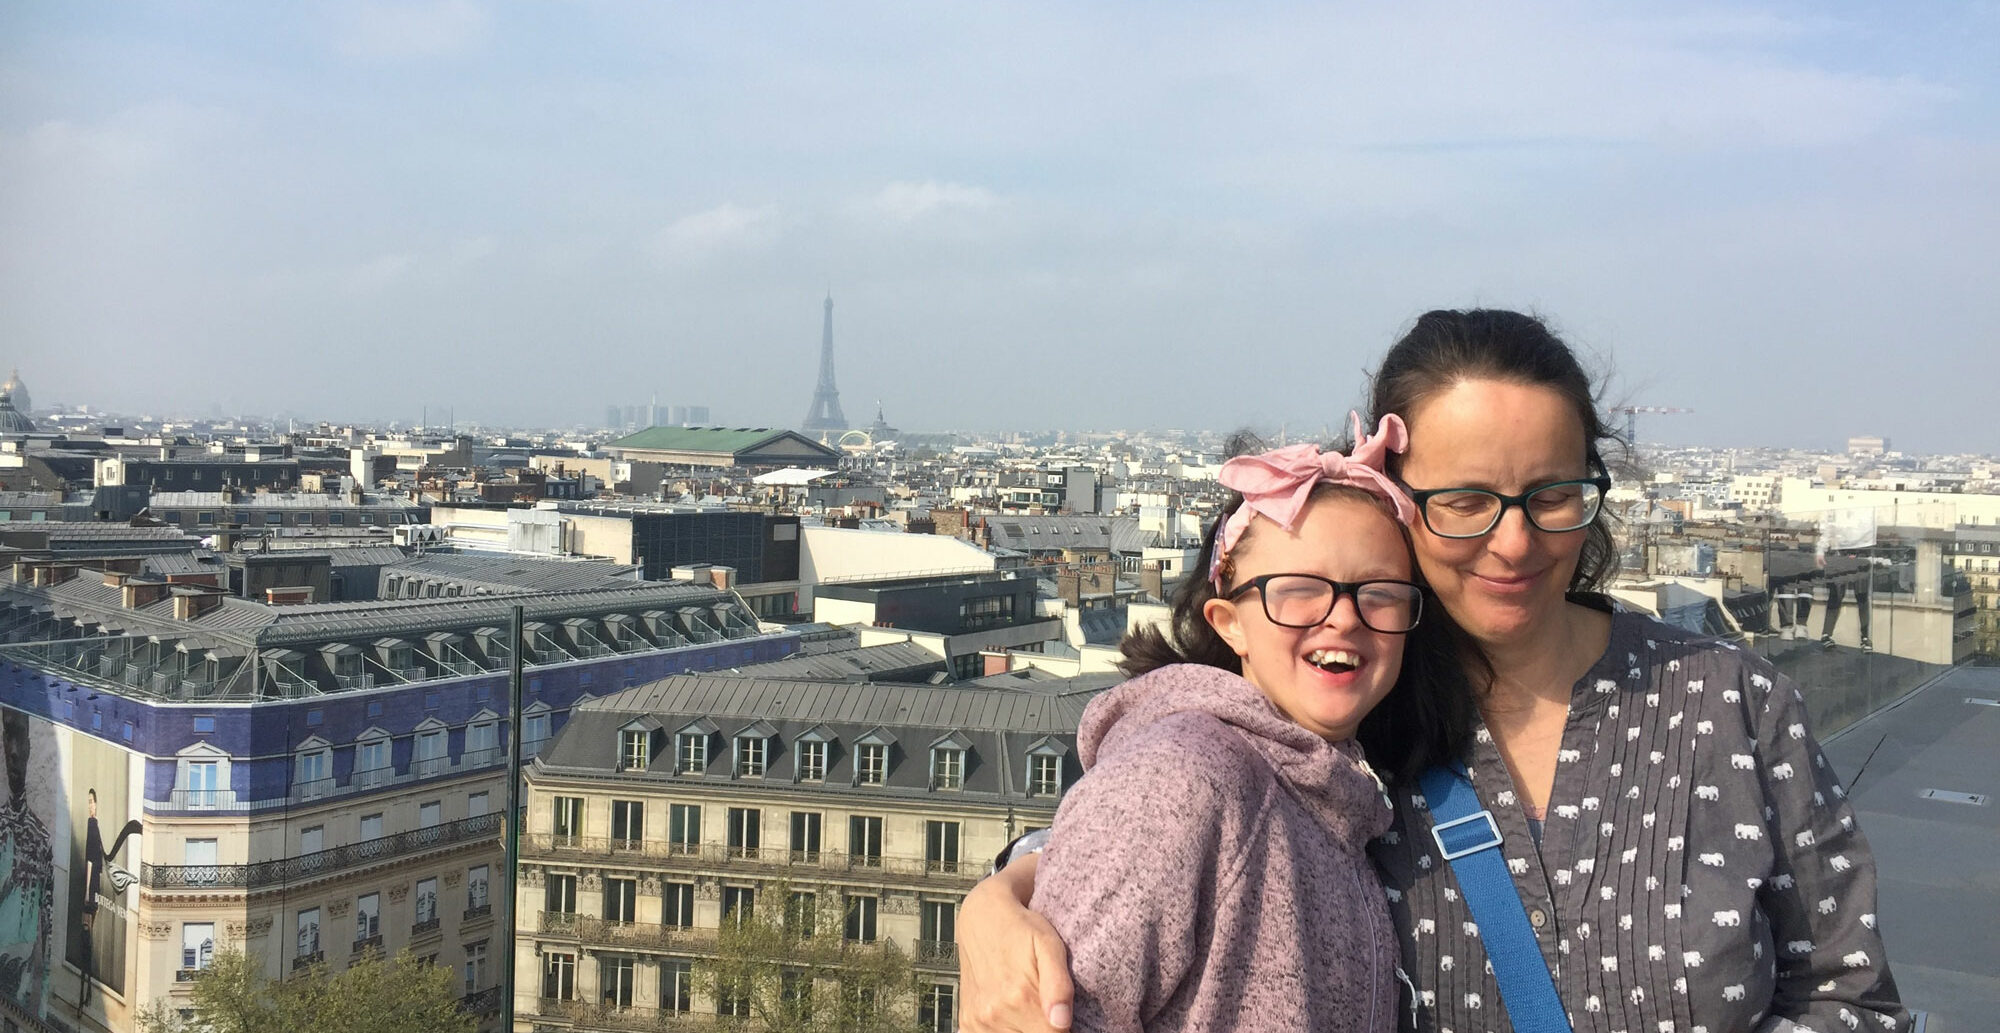 Mum and her older daughter, both wearing glasses, standing on a roof terrace in Paris, with Eiffel tower in background.